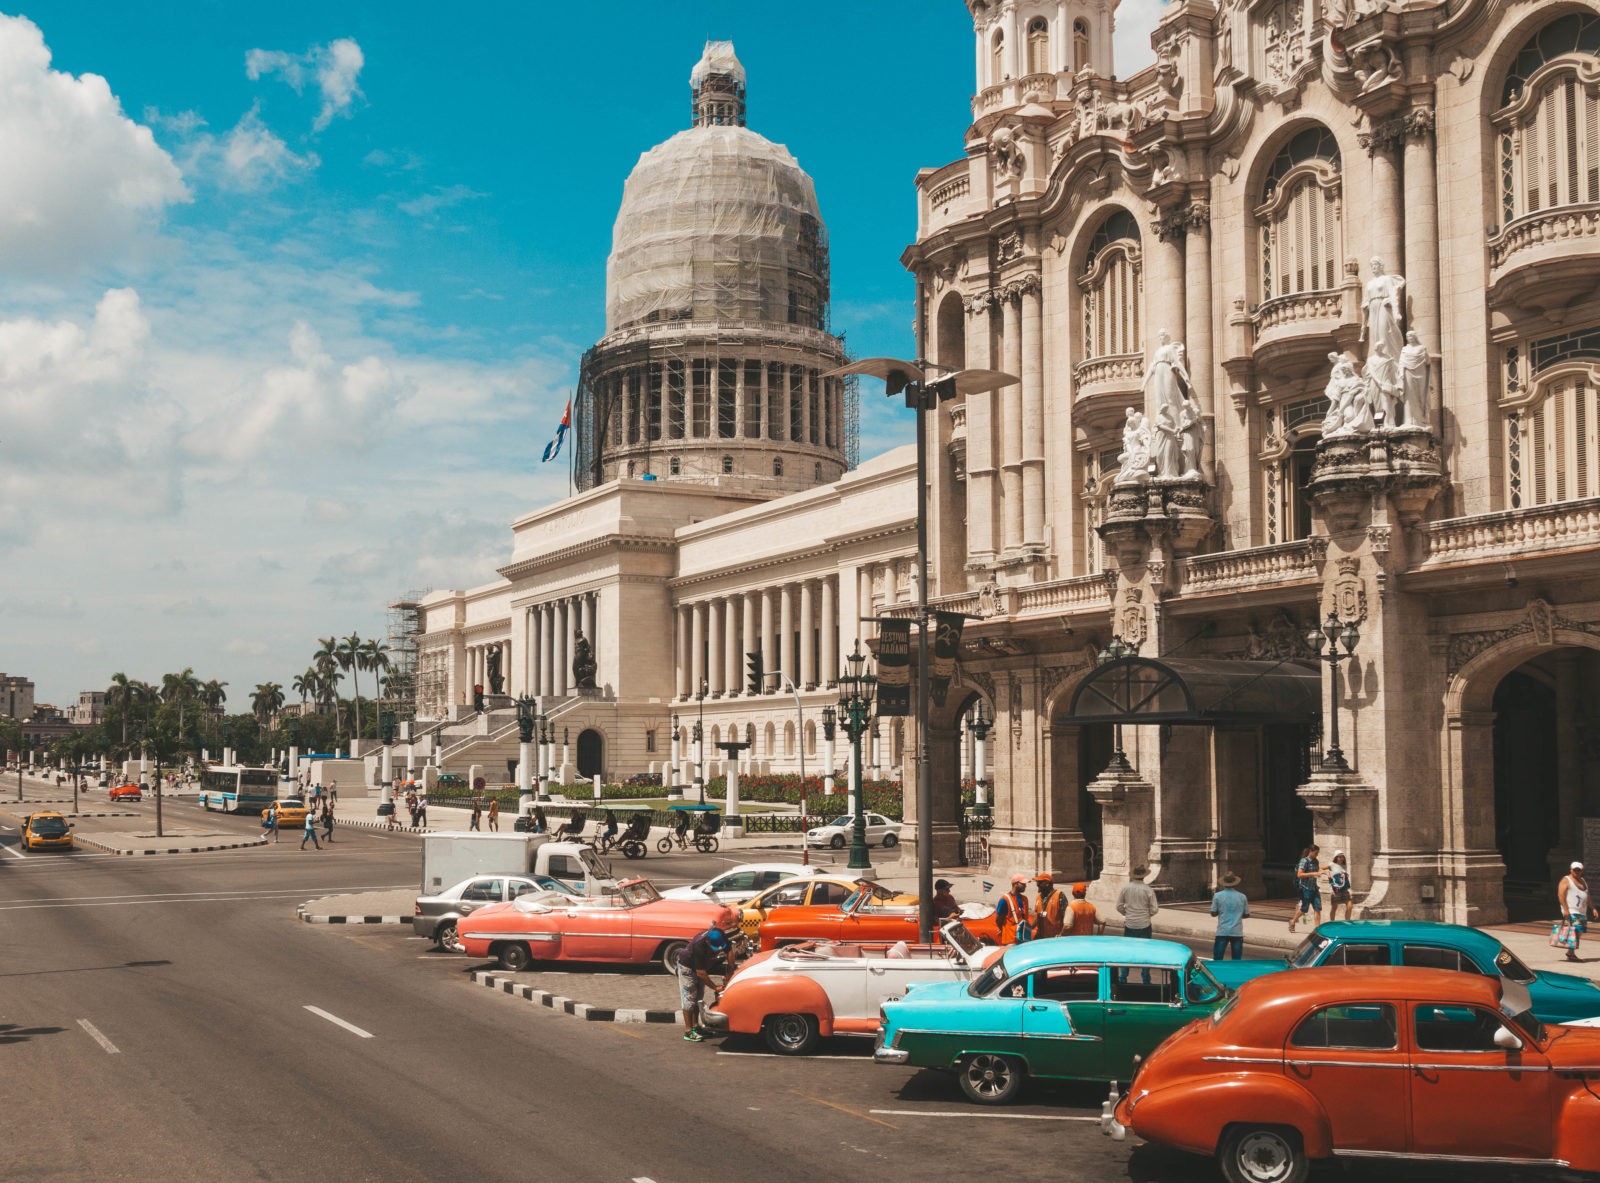 Classic cars parked in front of a building in Havana, capturing the essence of 48 hours in the vibrant city.